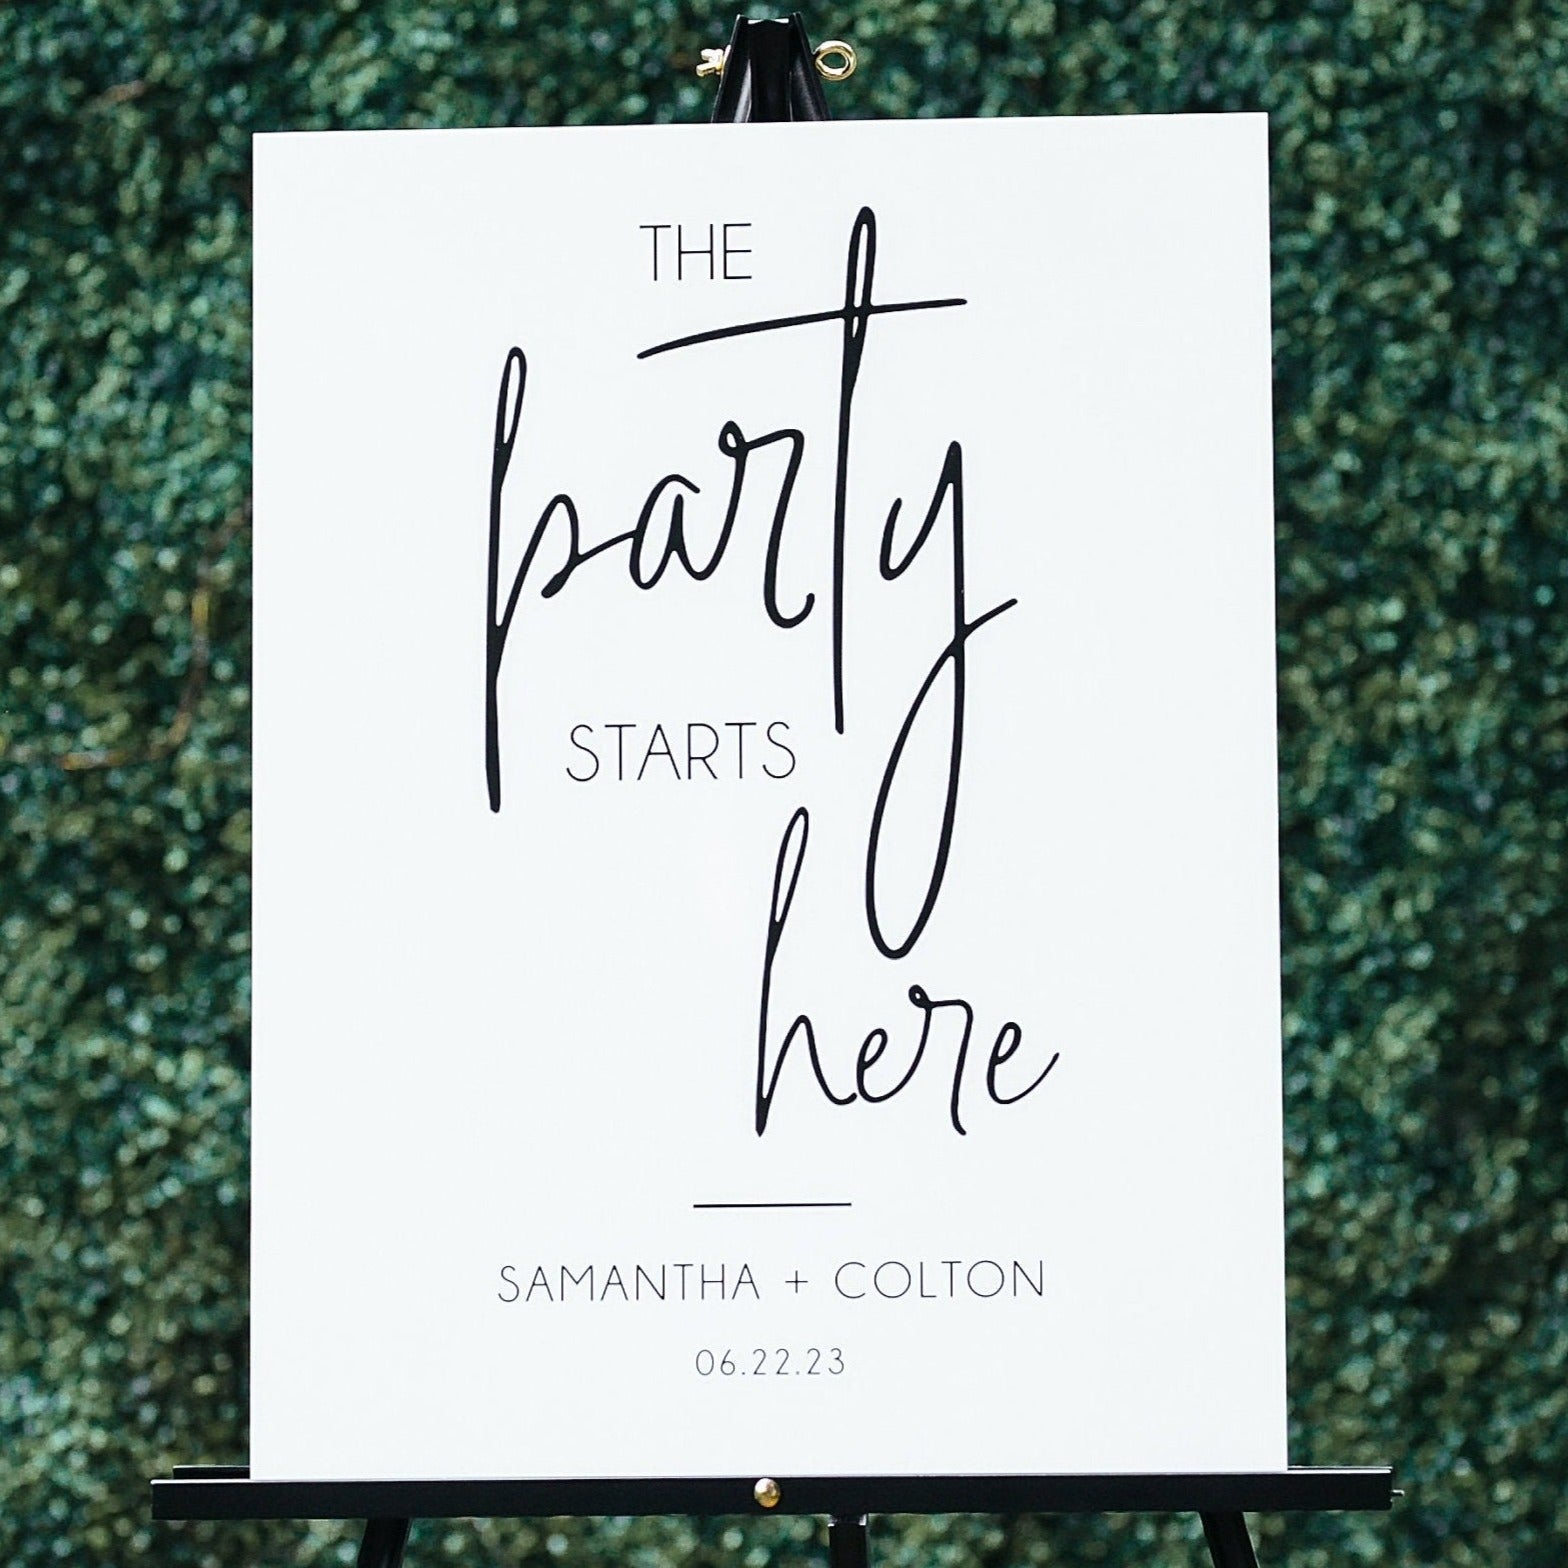 The Party Starts Here S3-ES16